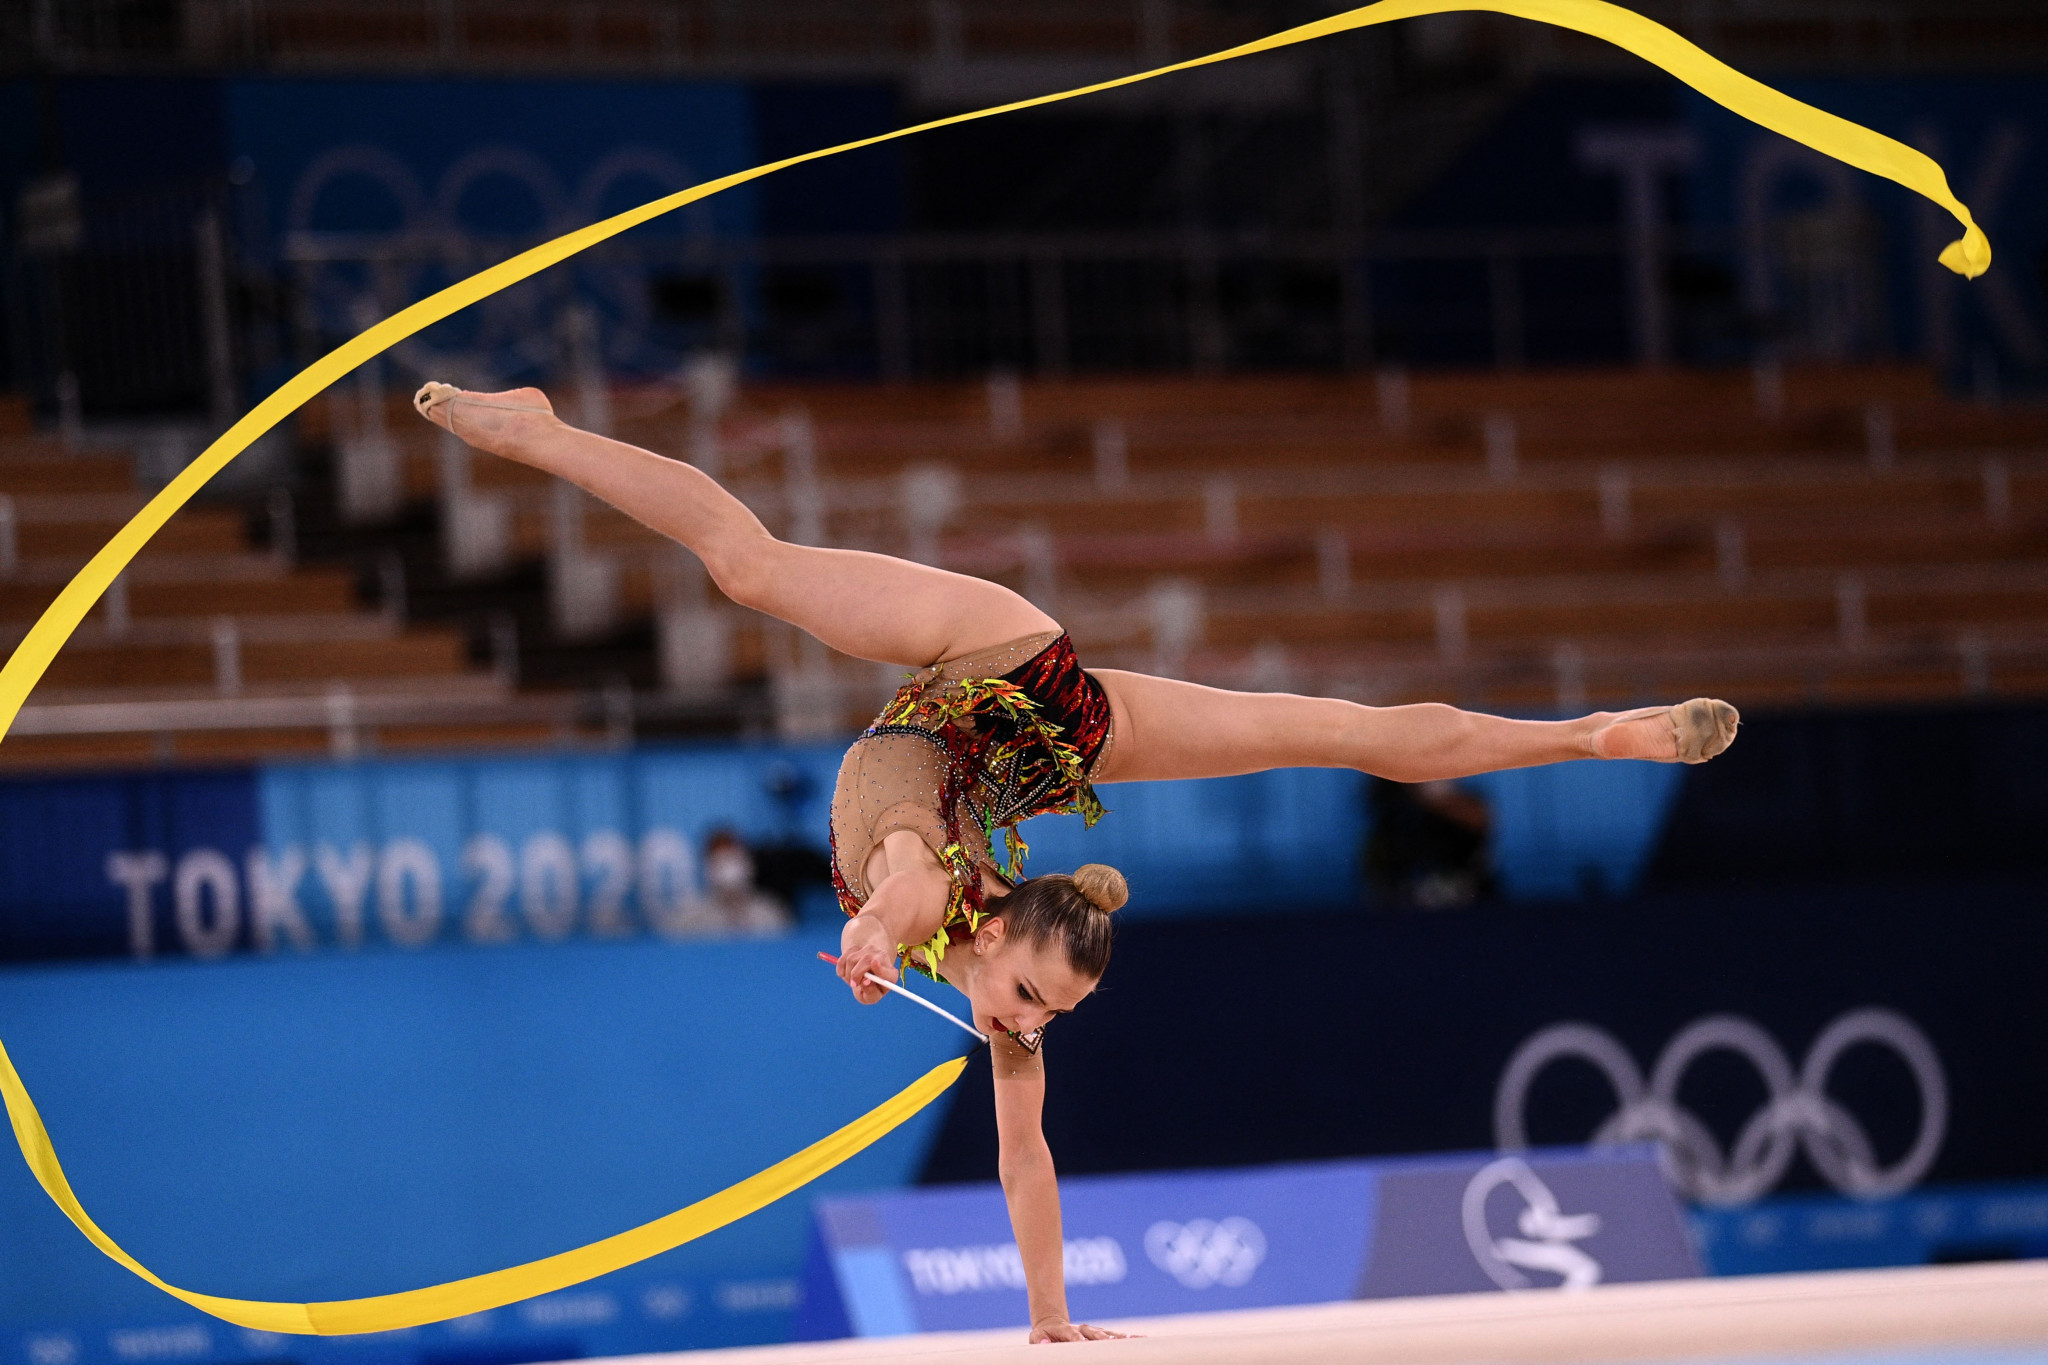 Australia's Lidiia Iakovleva was among those who starred at last year’s Oceania Continental Championships in rhythmic gymnastics ©Getty Images